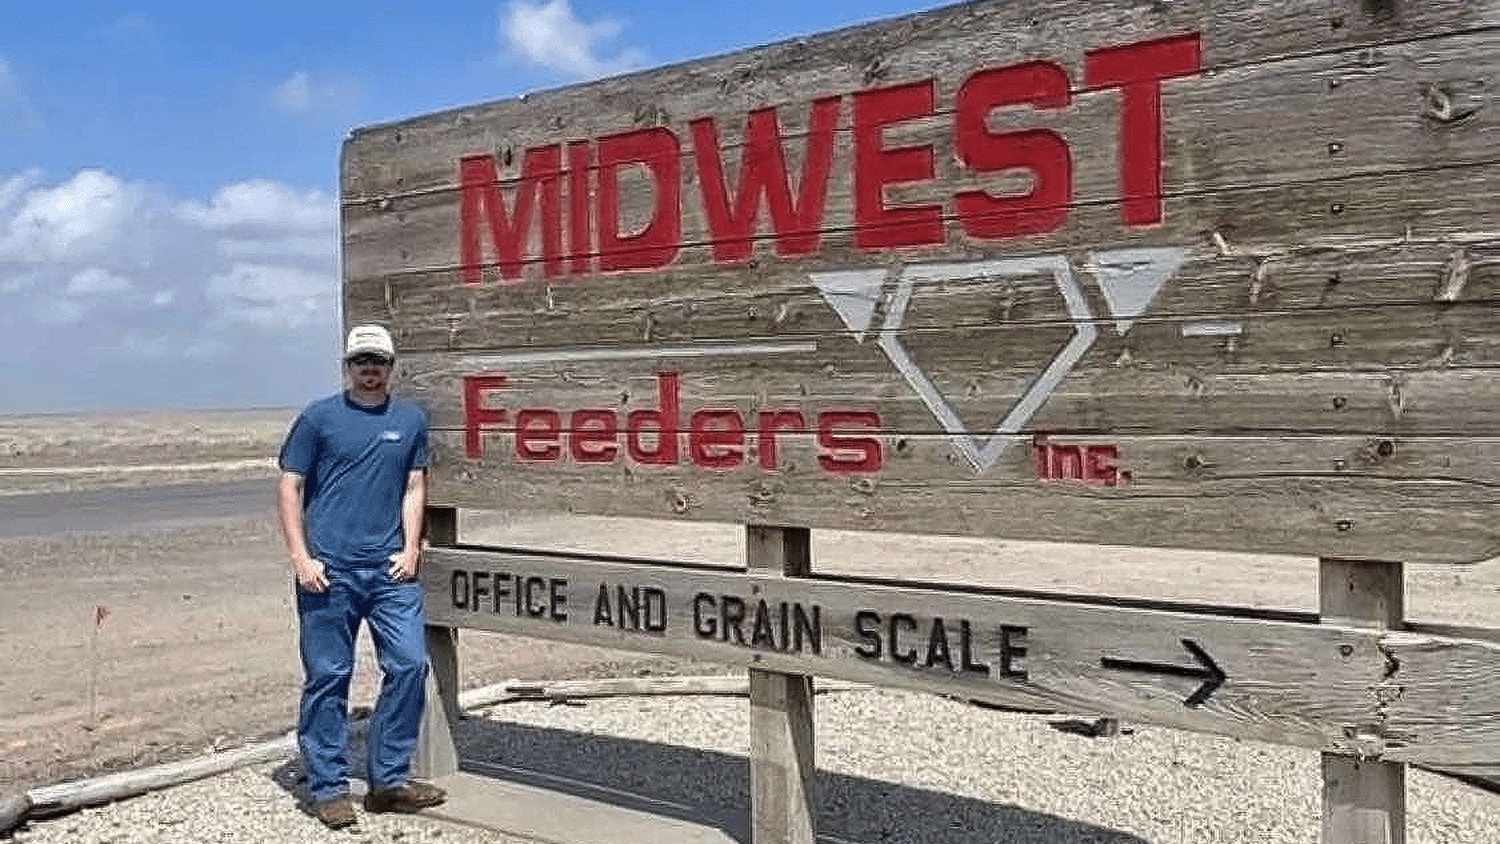 man standing in front of "Midwest" sign